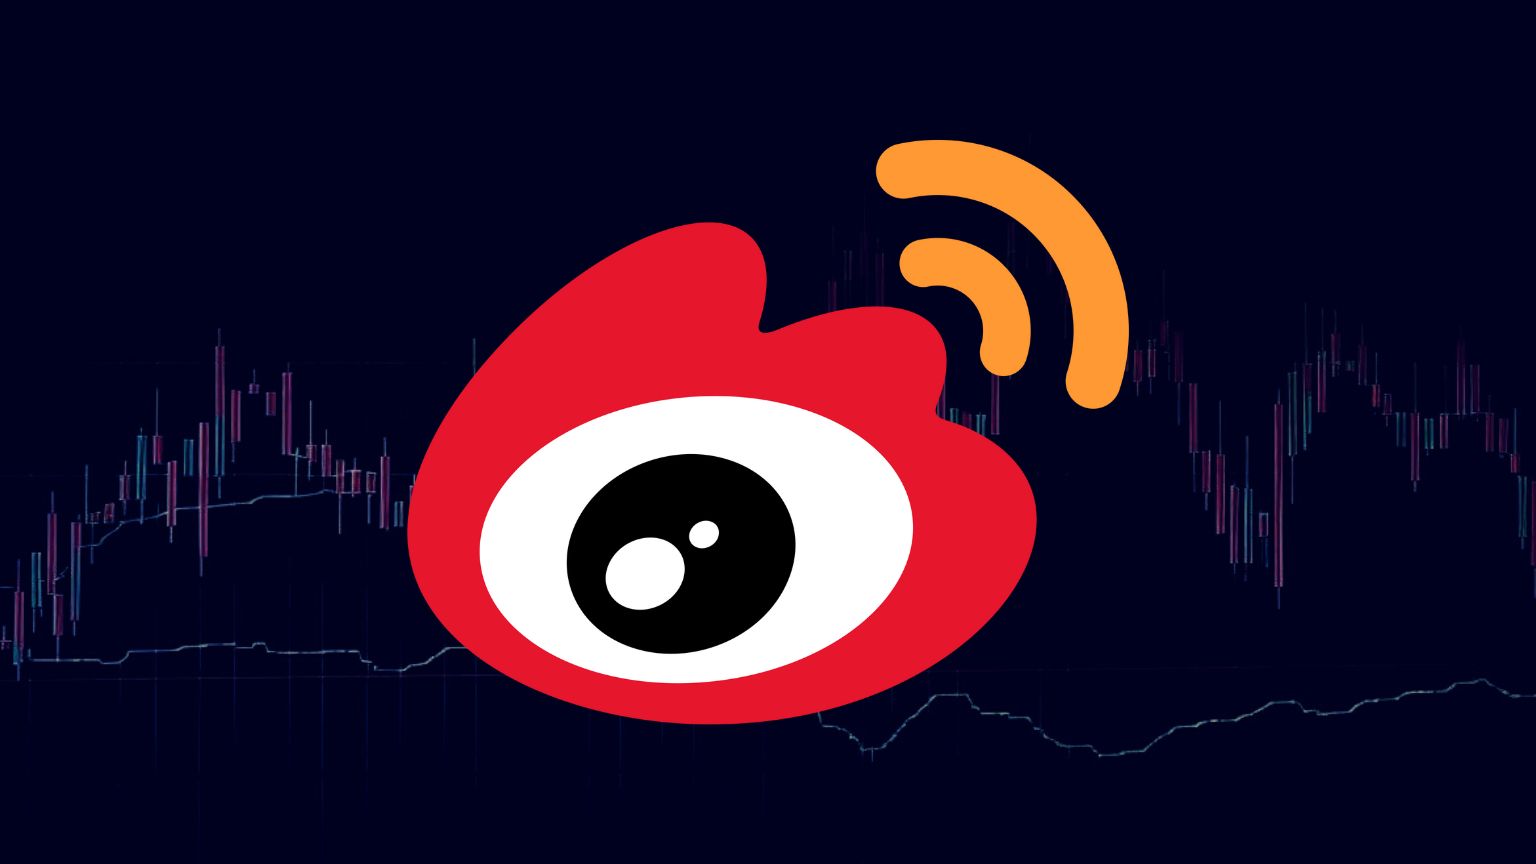 China’s Weibo App Urges Bloggers to Refrain from Negative Comments About the Economy